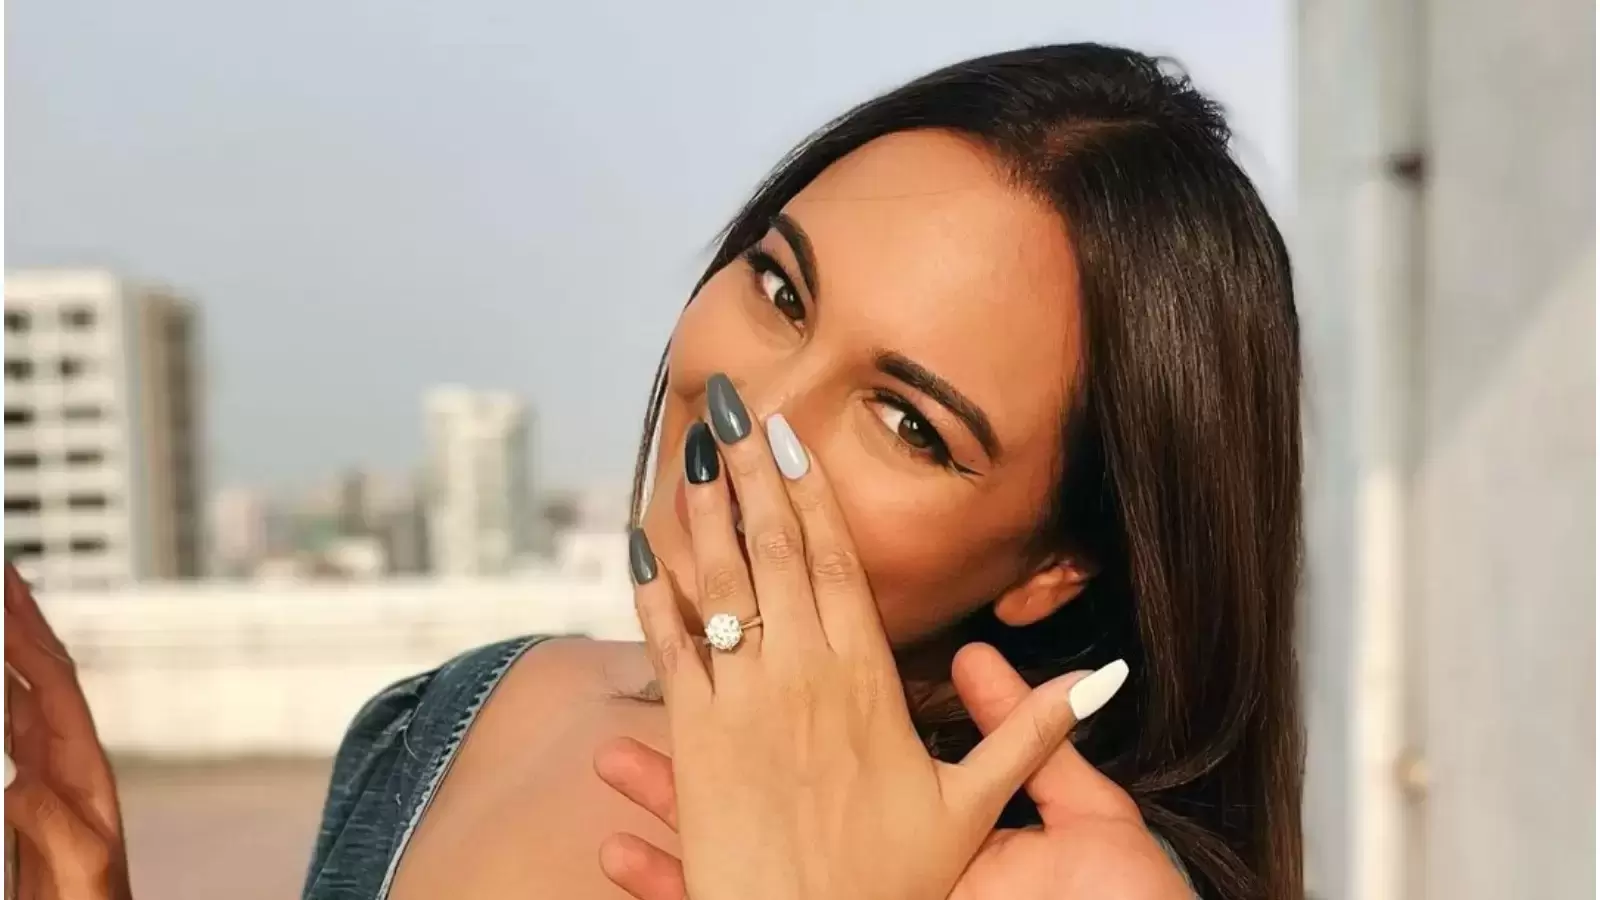 Sonakshi Sinha launches her brand after teasing fans with engagement ring  pics | Bollywood - Hindustan Times